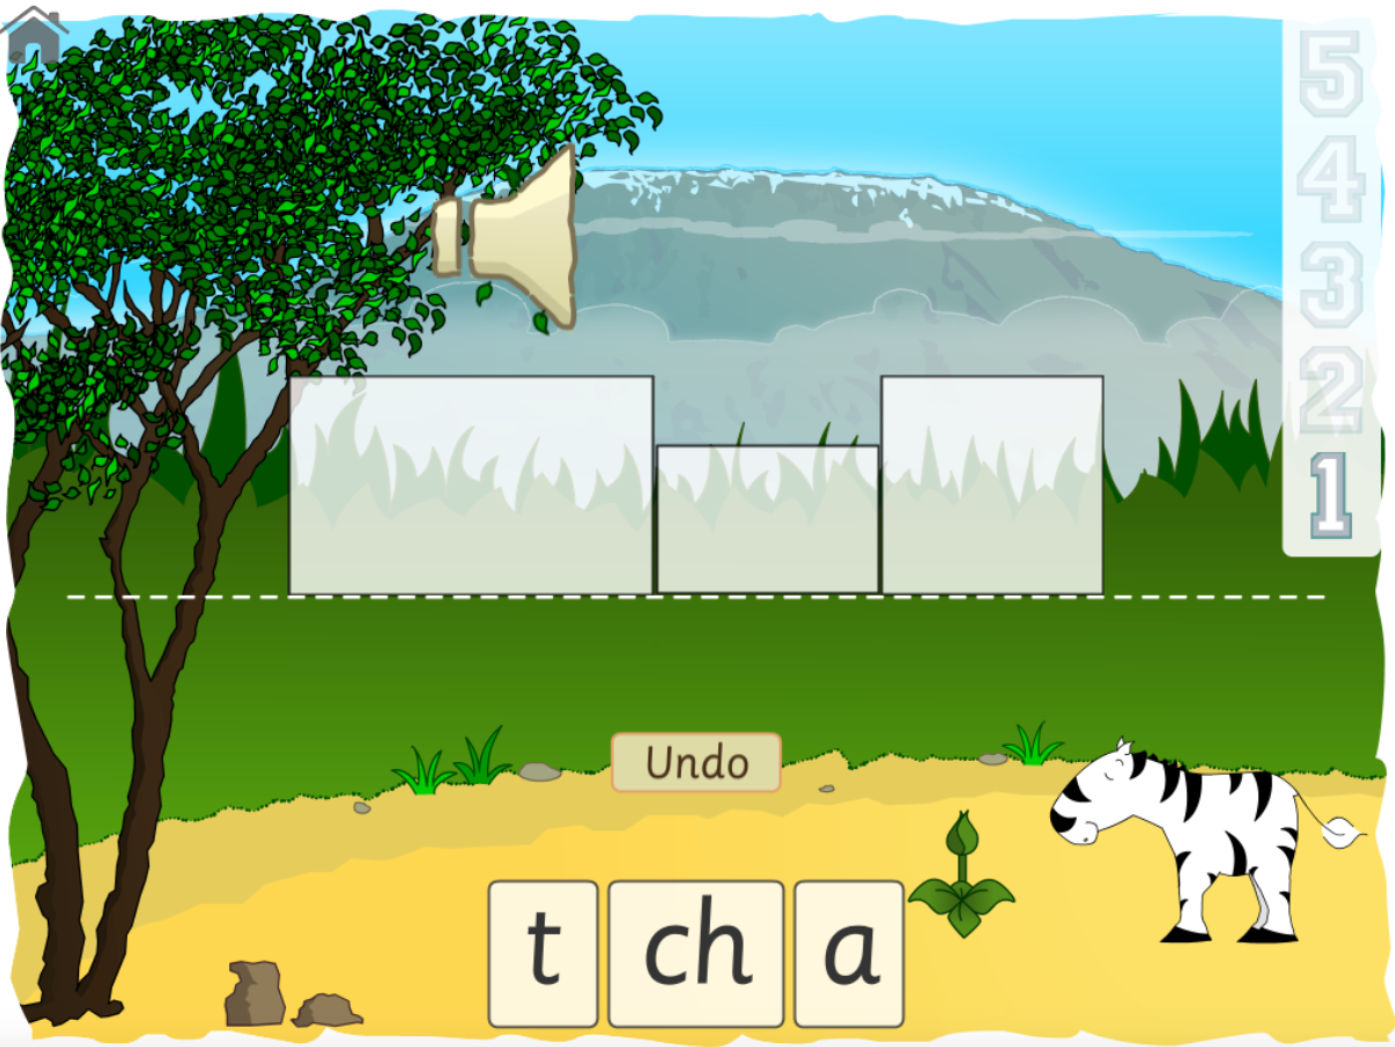 Image of the spelling consonant digraphs game